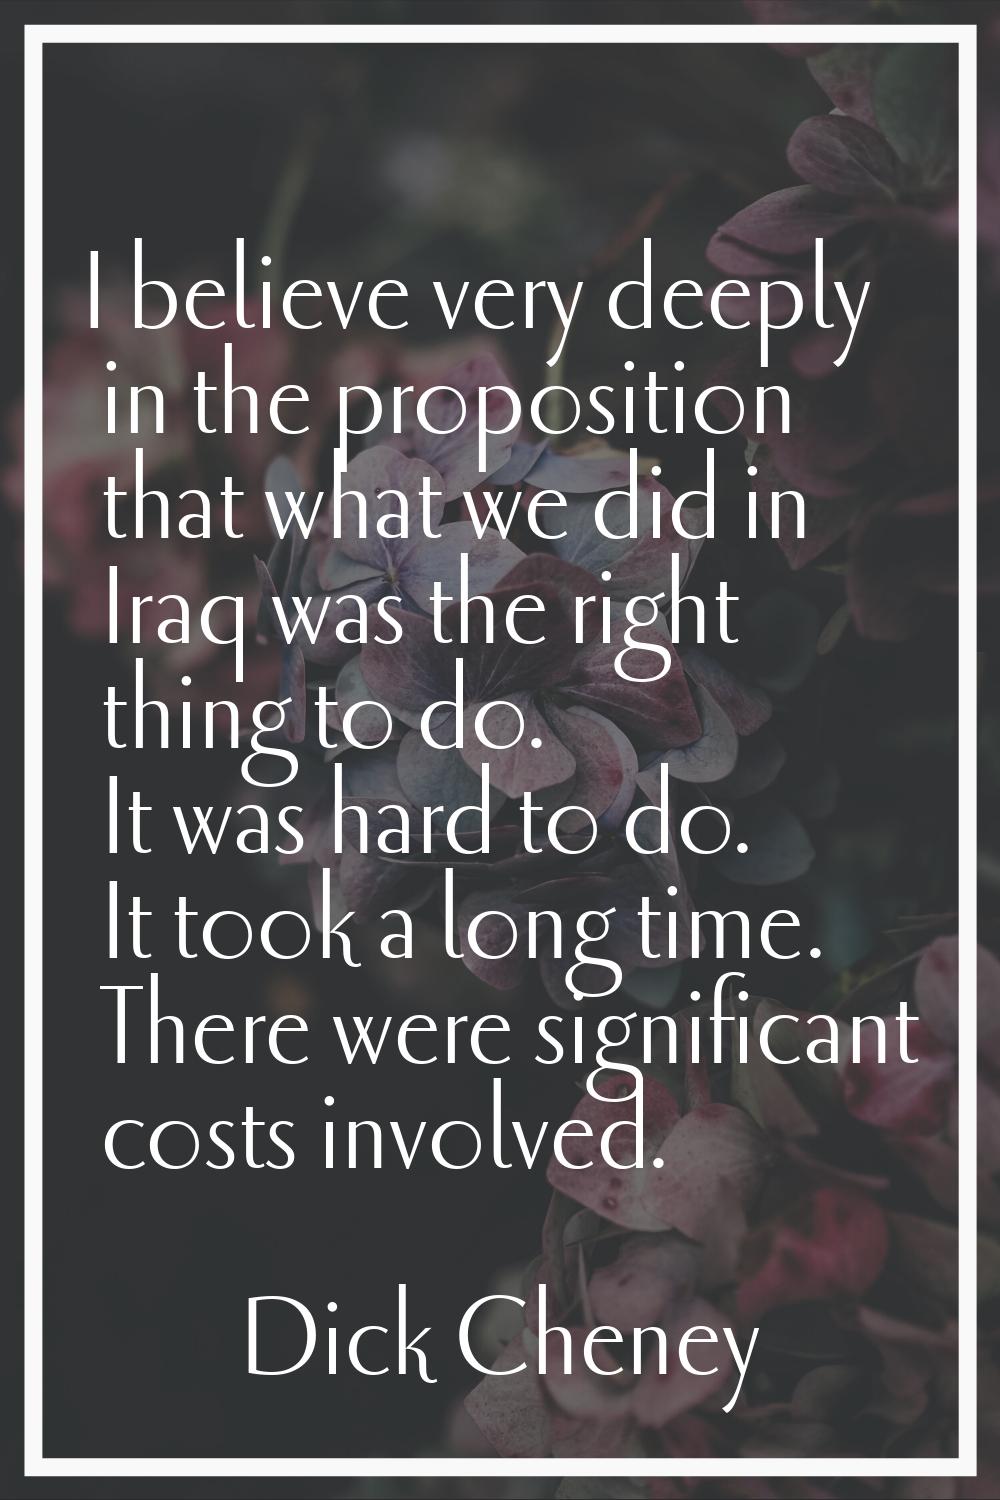 I believe very deeply in the proposition that what we did in Iraq was the right thing to do. It was